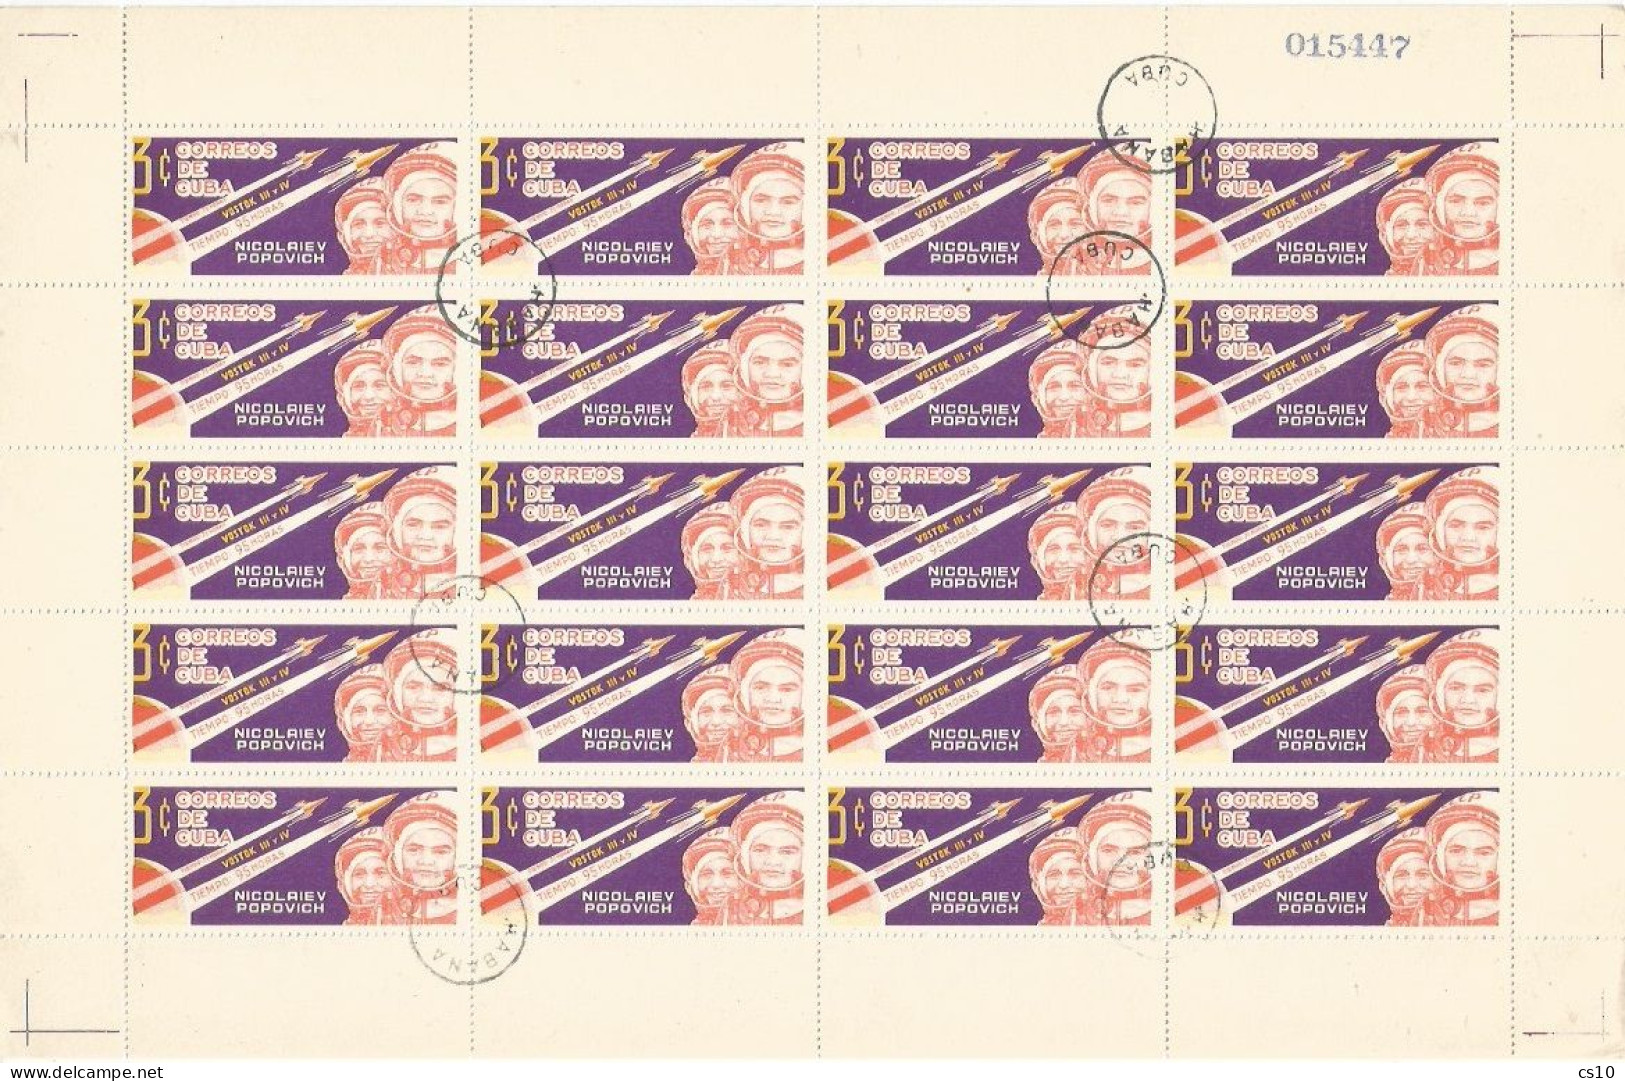 Cuba USSR Space Conquest Vostok Missions PART Set 3v In 3 Cpl Sheets Of 20pcs In CTO Condition - NON FOLDED - Used Stamps